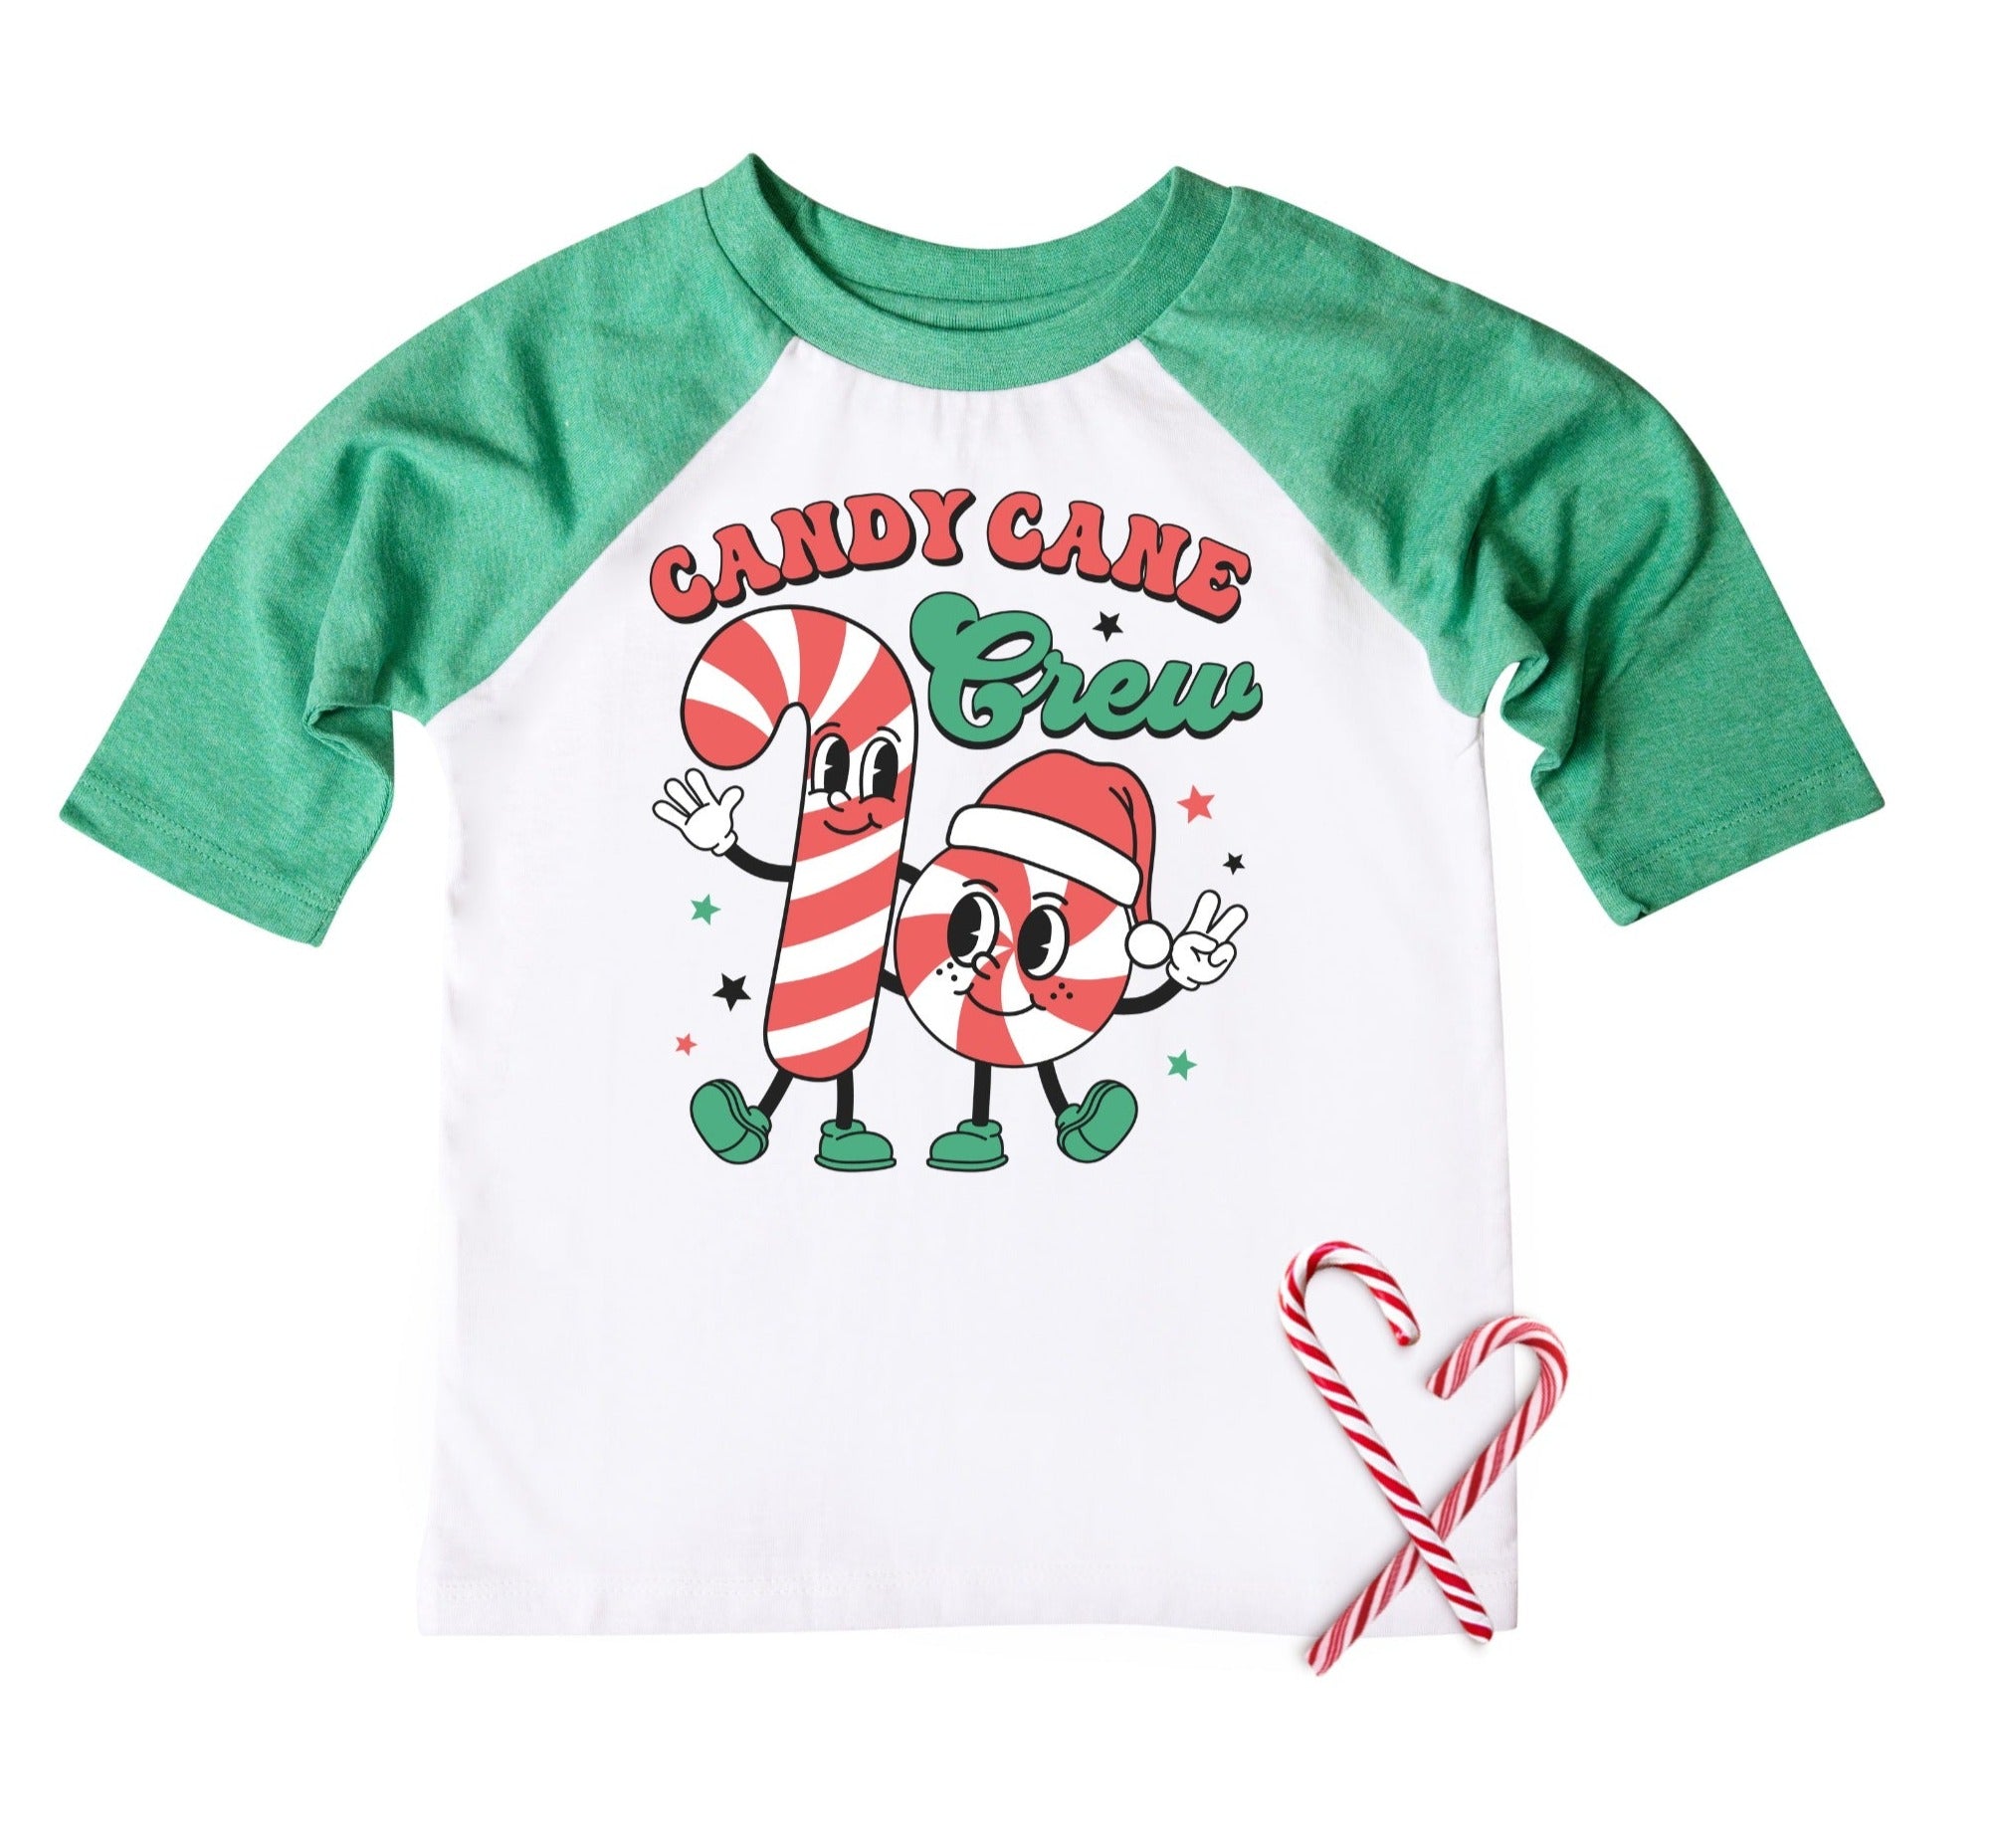 NEW Gymboree Reindeer Candy Cane Tee Top Shirt NWT North Pole